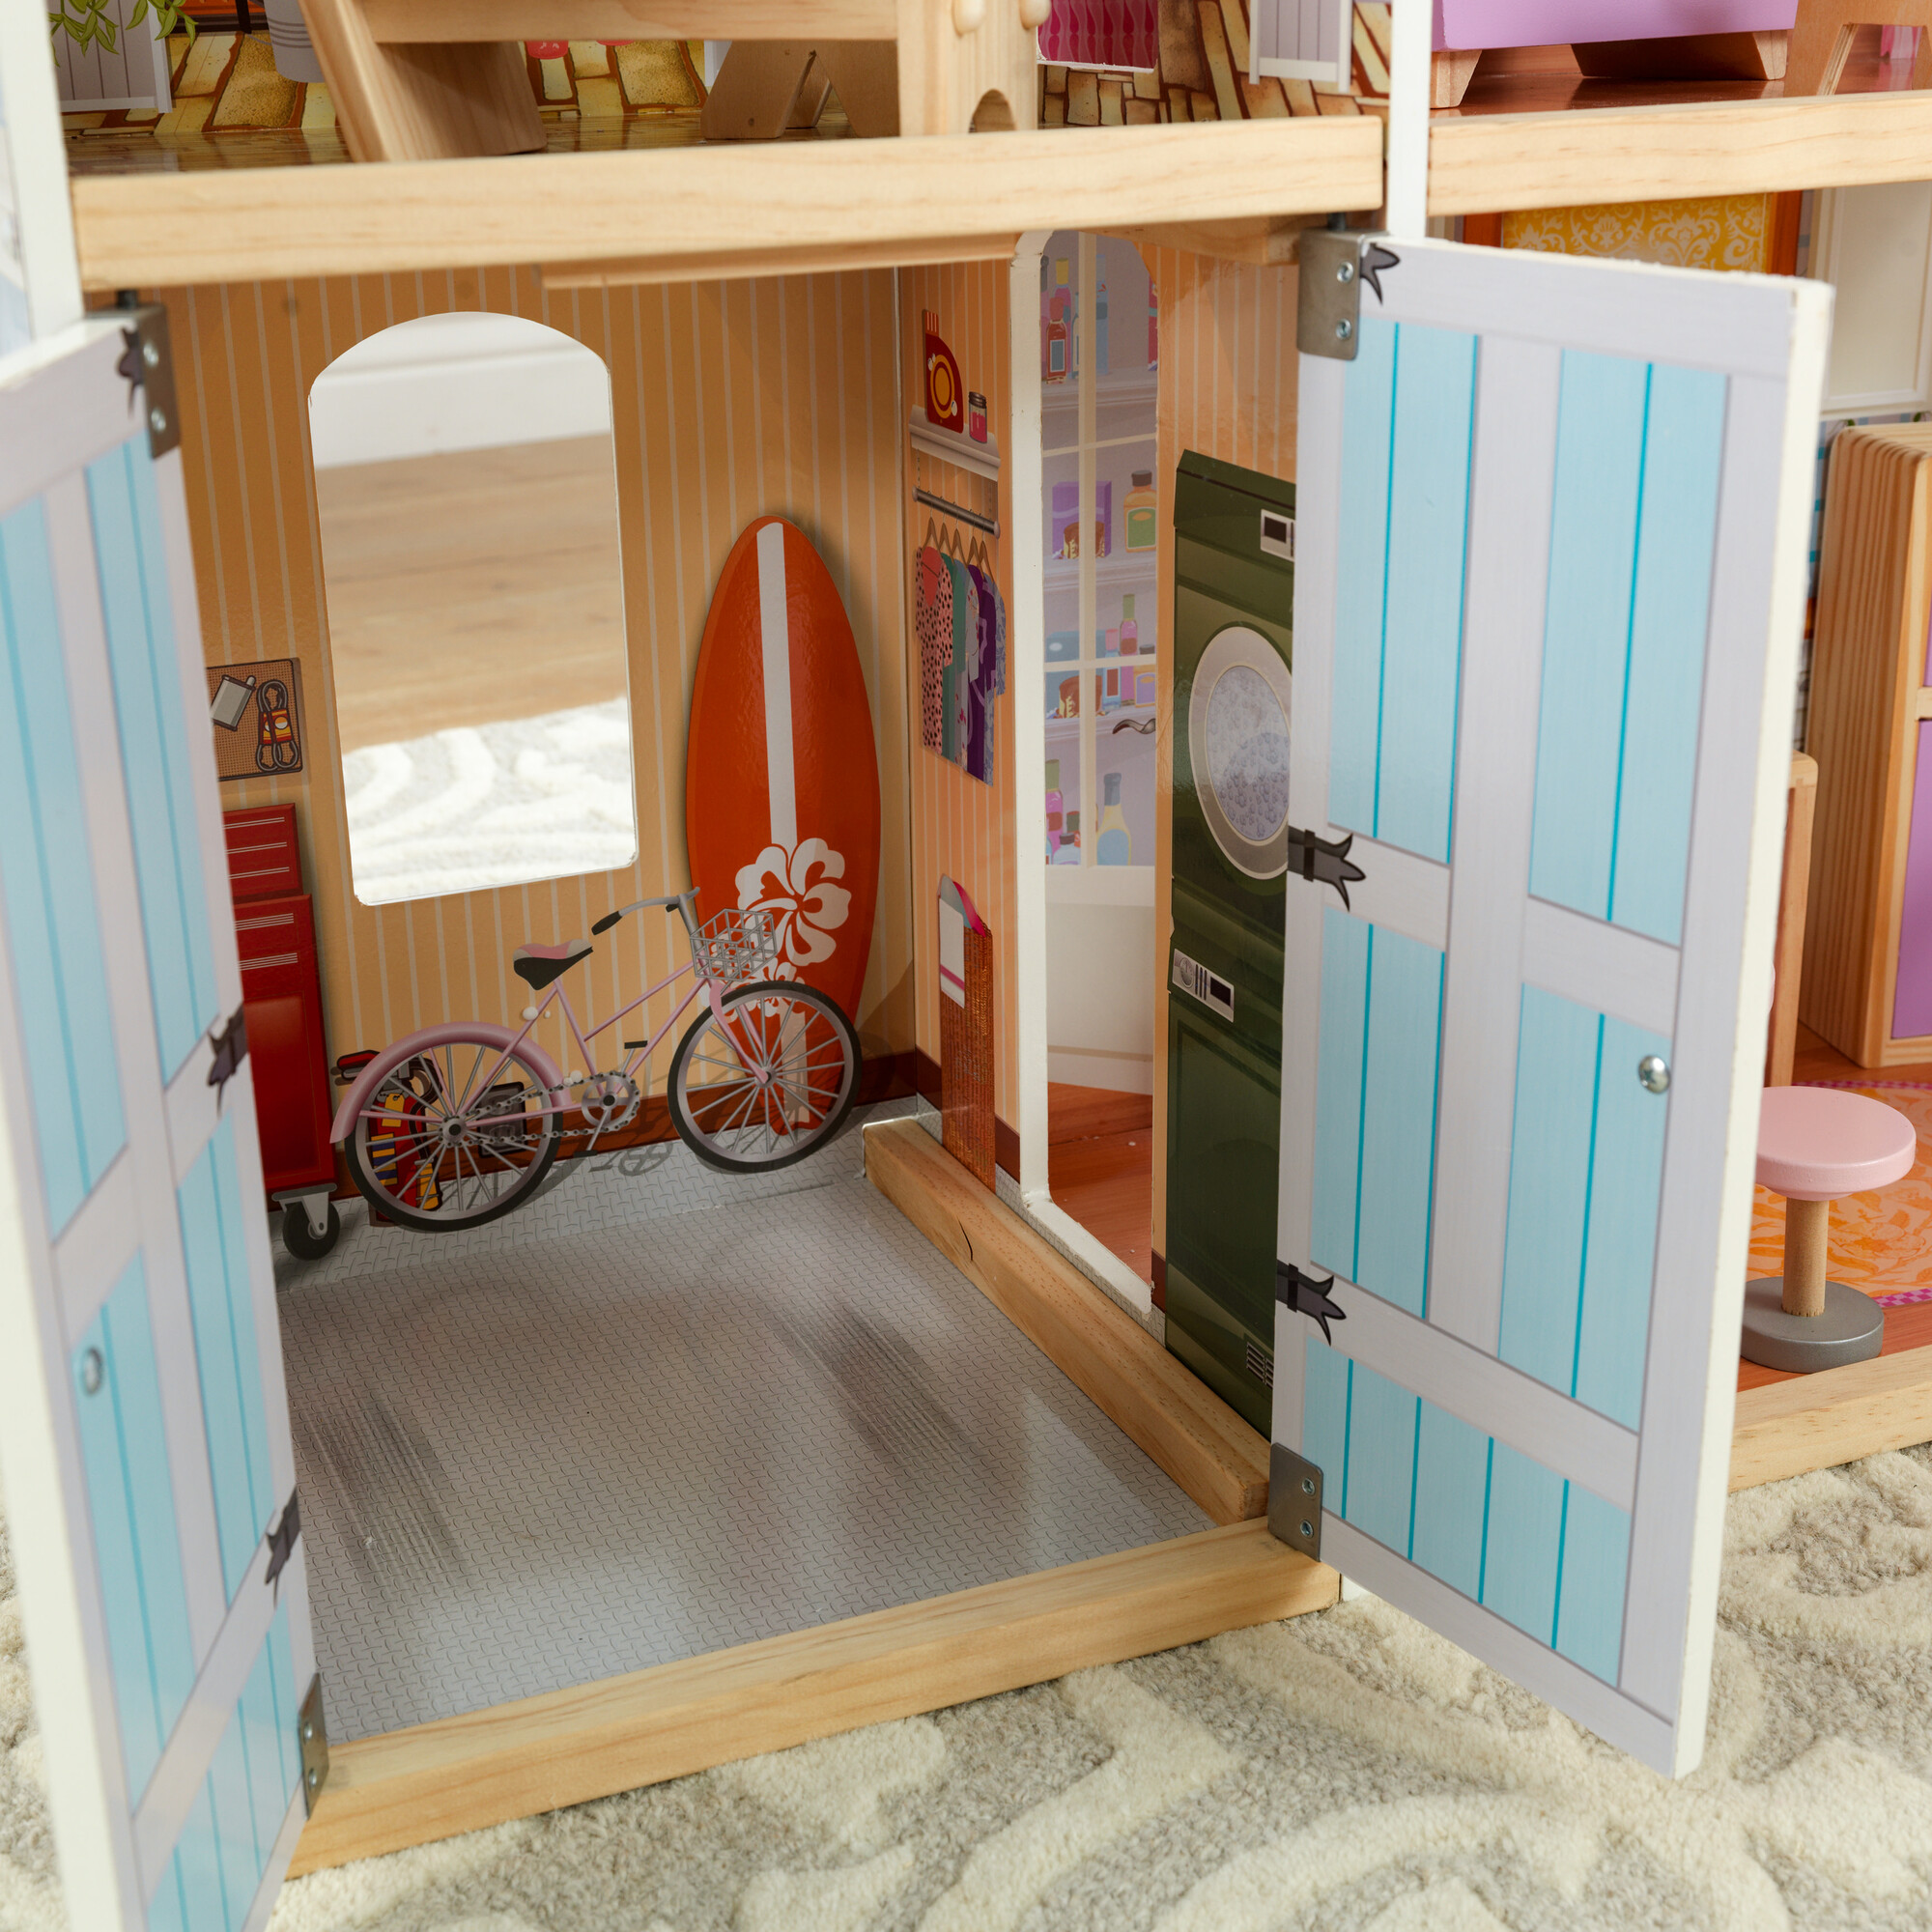 Grand View Mansion - KidKraft Dollhouses & Accessories